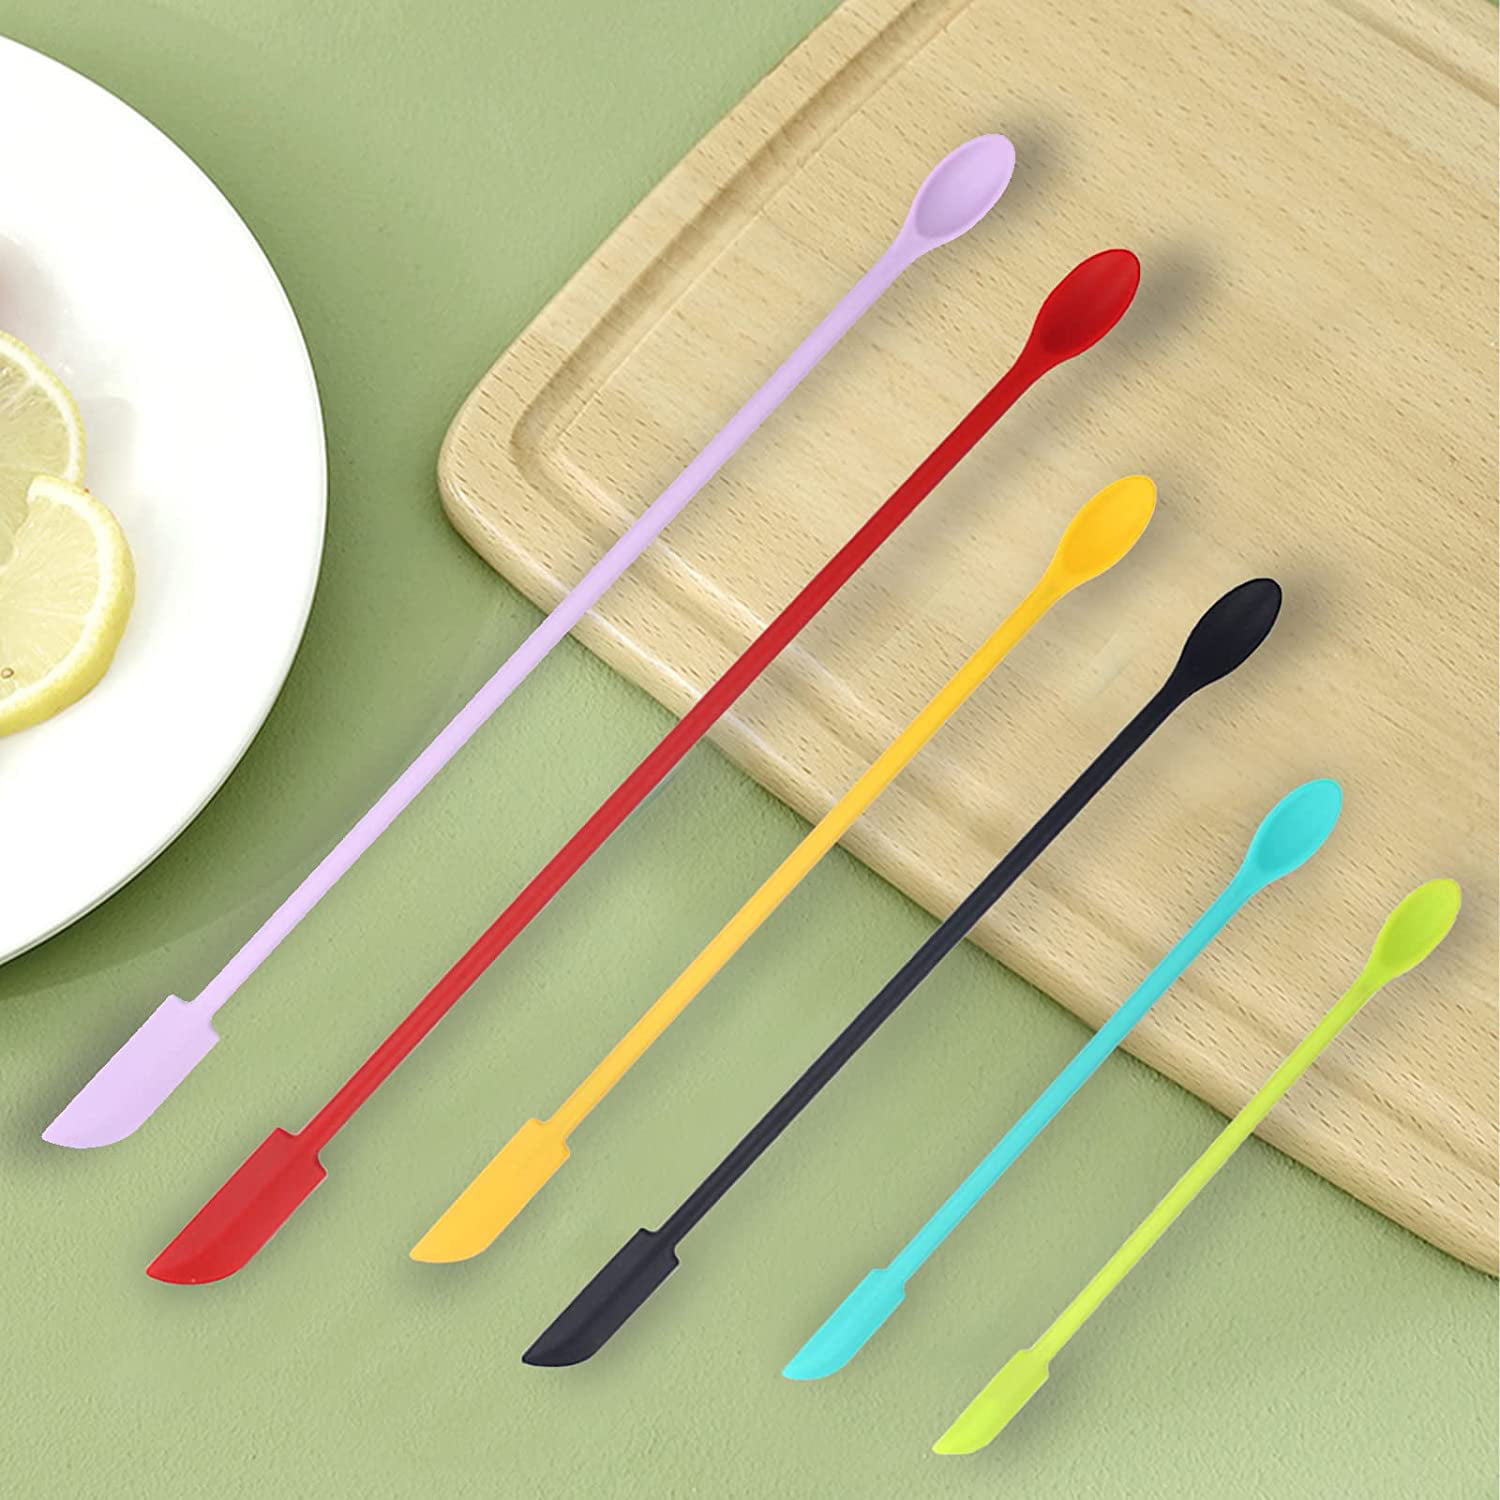 Mini Spatula Marble Silicone - Function Junction